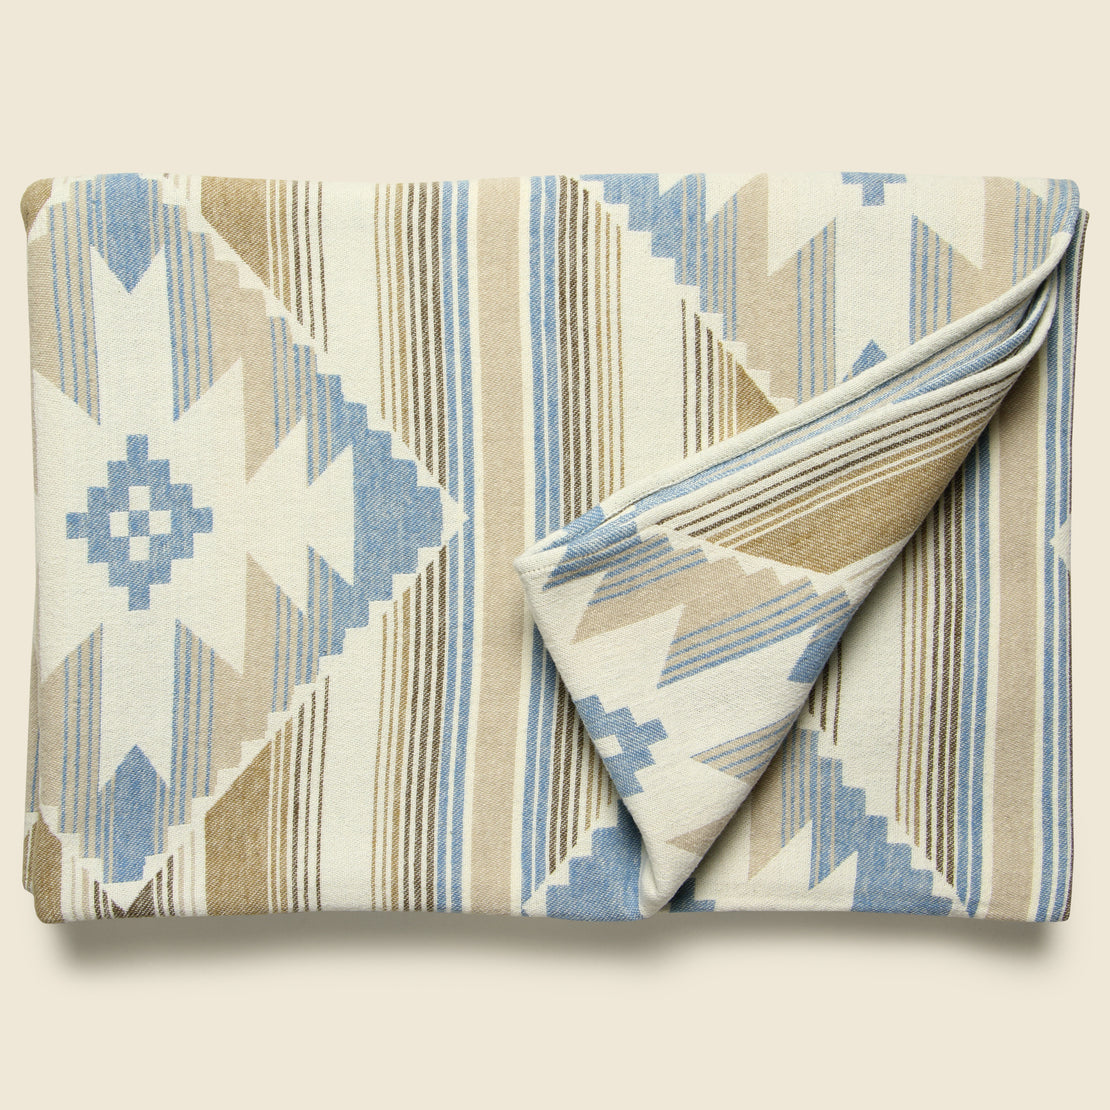 Adirondack Blanket - Prairie Stream - Faherty - STAG Provisions - Home - Bed - Blanket